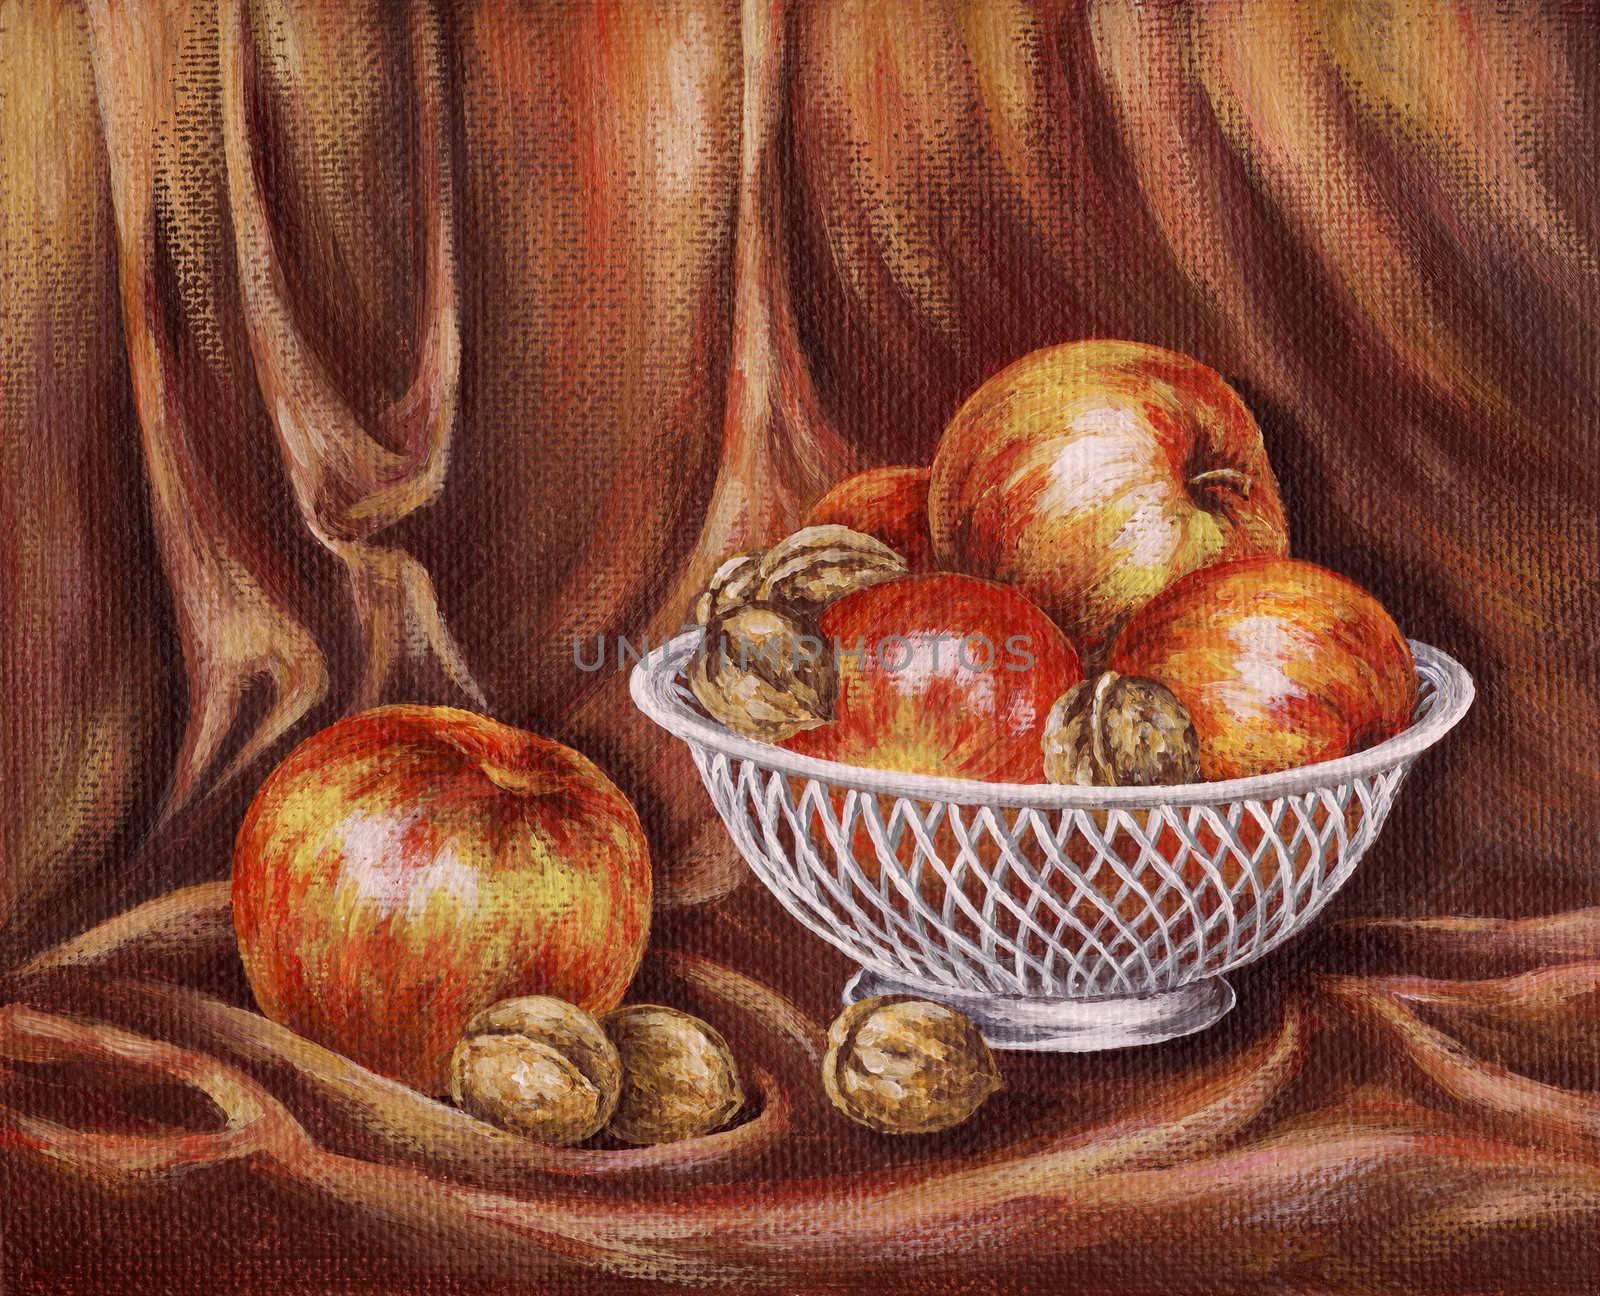 Apples and nuts on a red by alexcoolok